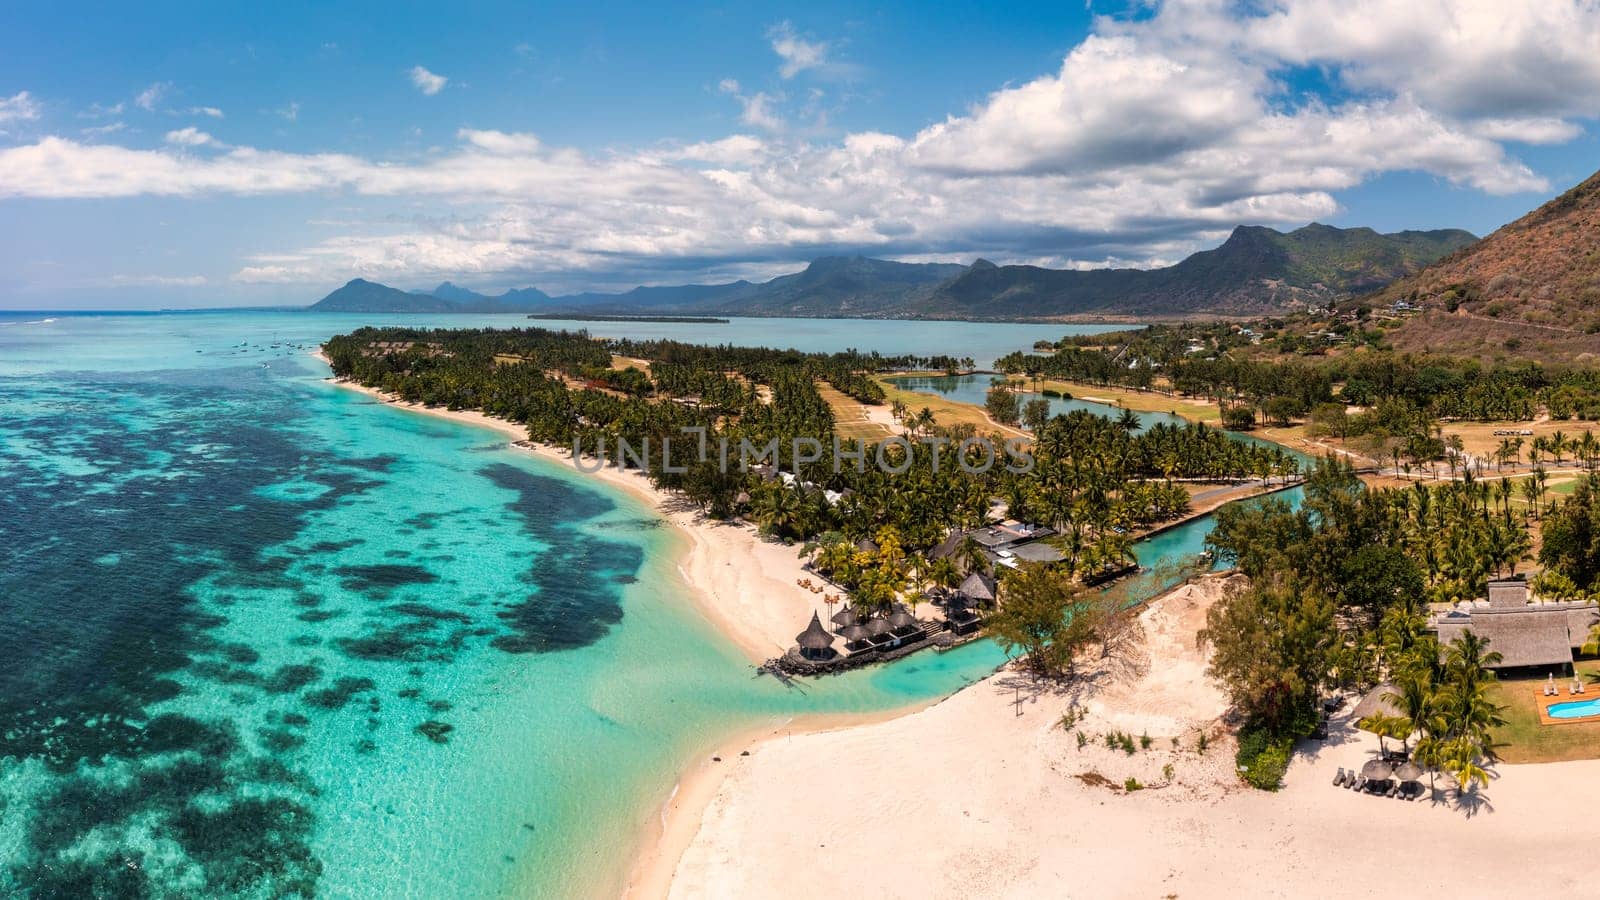 Beach with palm trees and umbrellas on Le morne beach in Mauriutius. Luxury tropical beach and Le Morne mountain in Mauritius. Le Morne beach with palm trees, white sand and luxury resorts, Mauritius